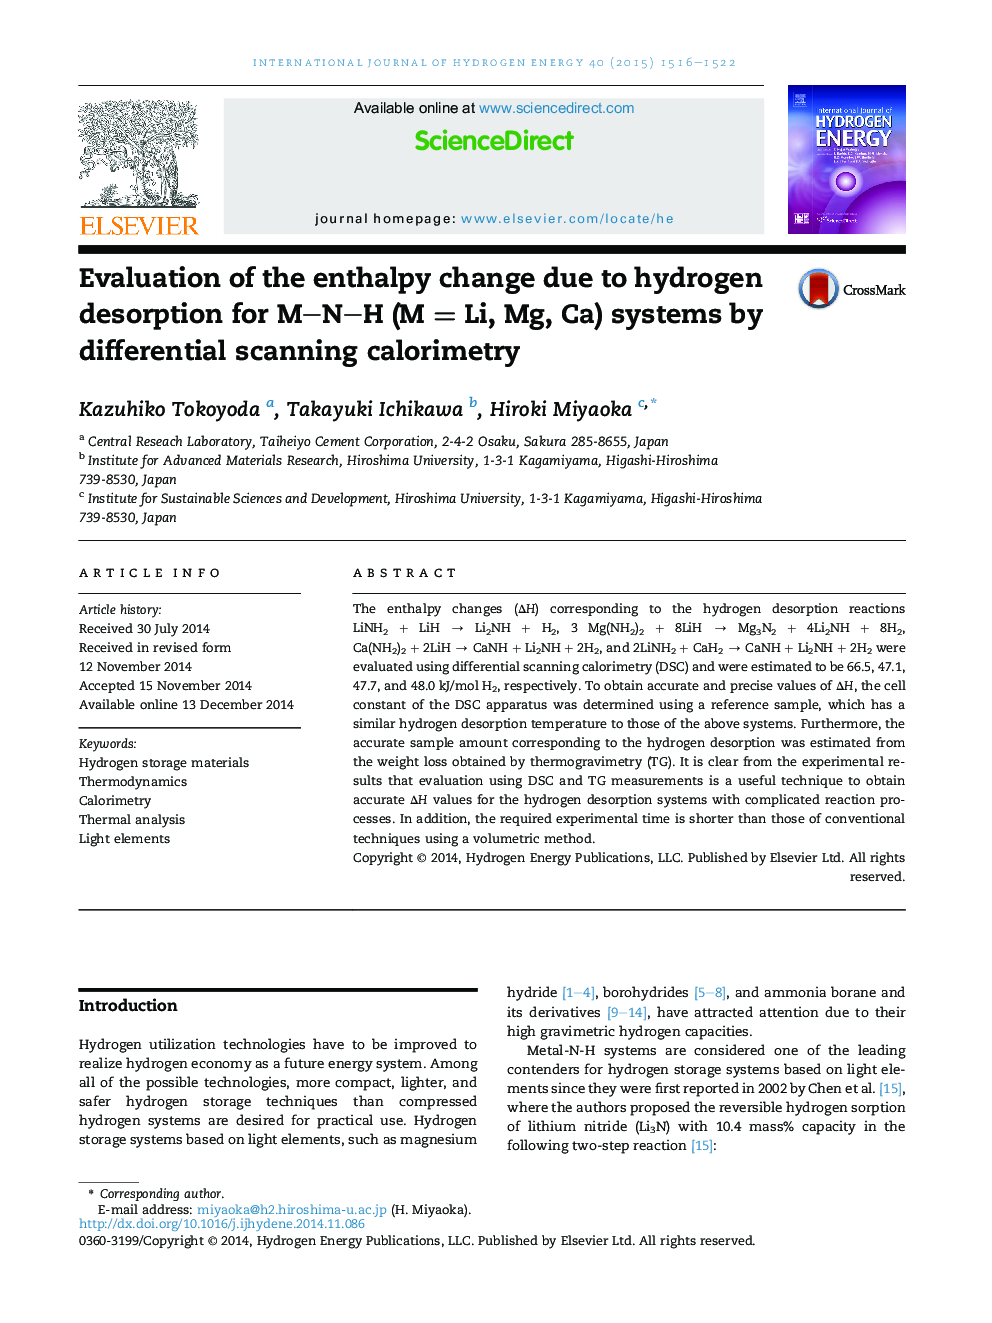 Evaluation of the enthalpy change due to hydrogen desorption for M–N–H (M = Li, Mg, Ca) systems by differential scanning calorimetry